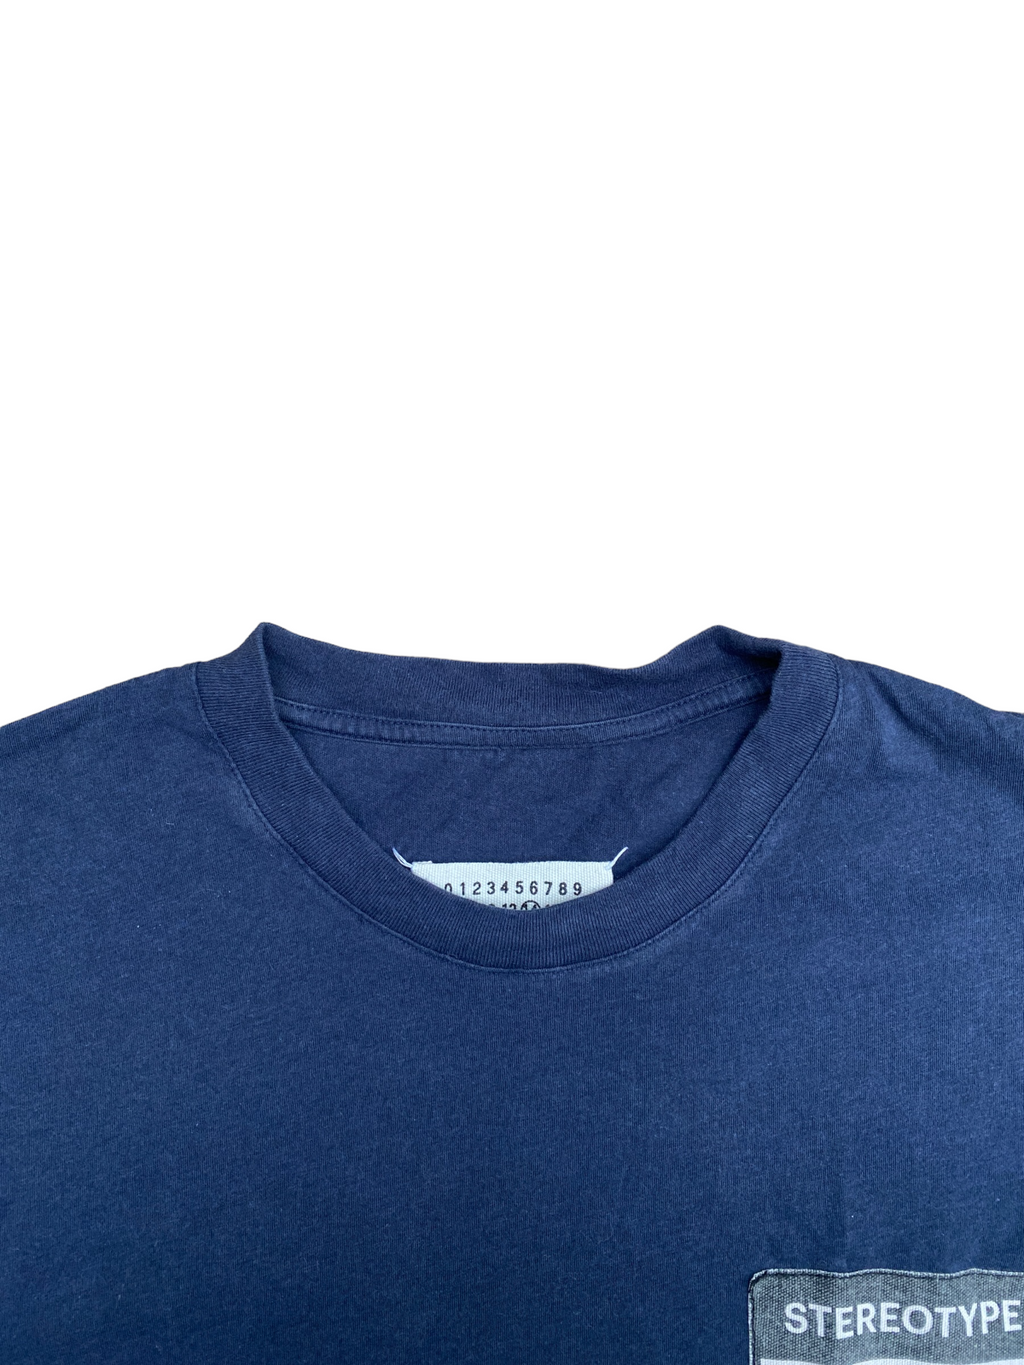 Navy Stereotype T-shirt